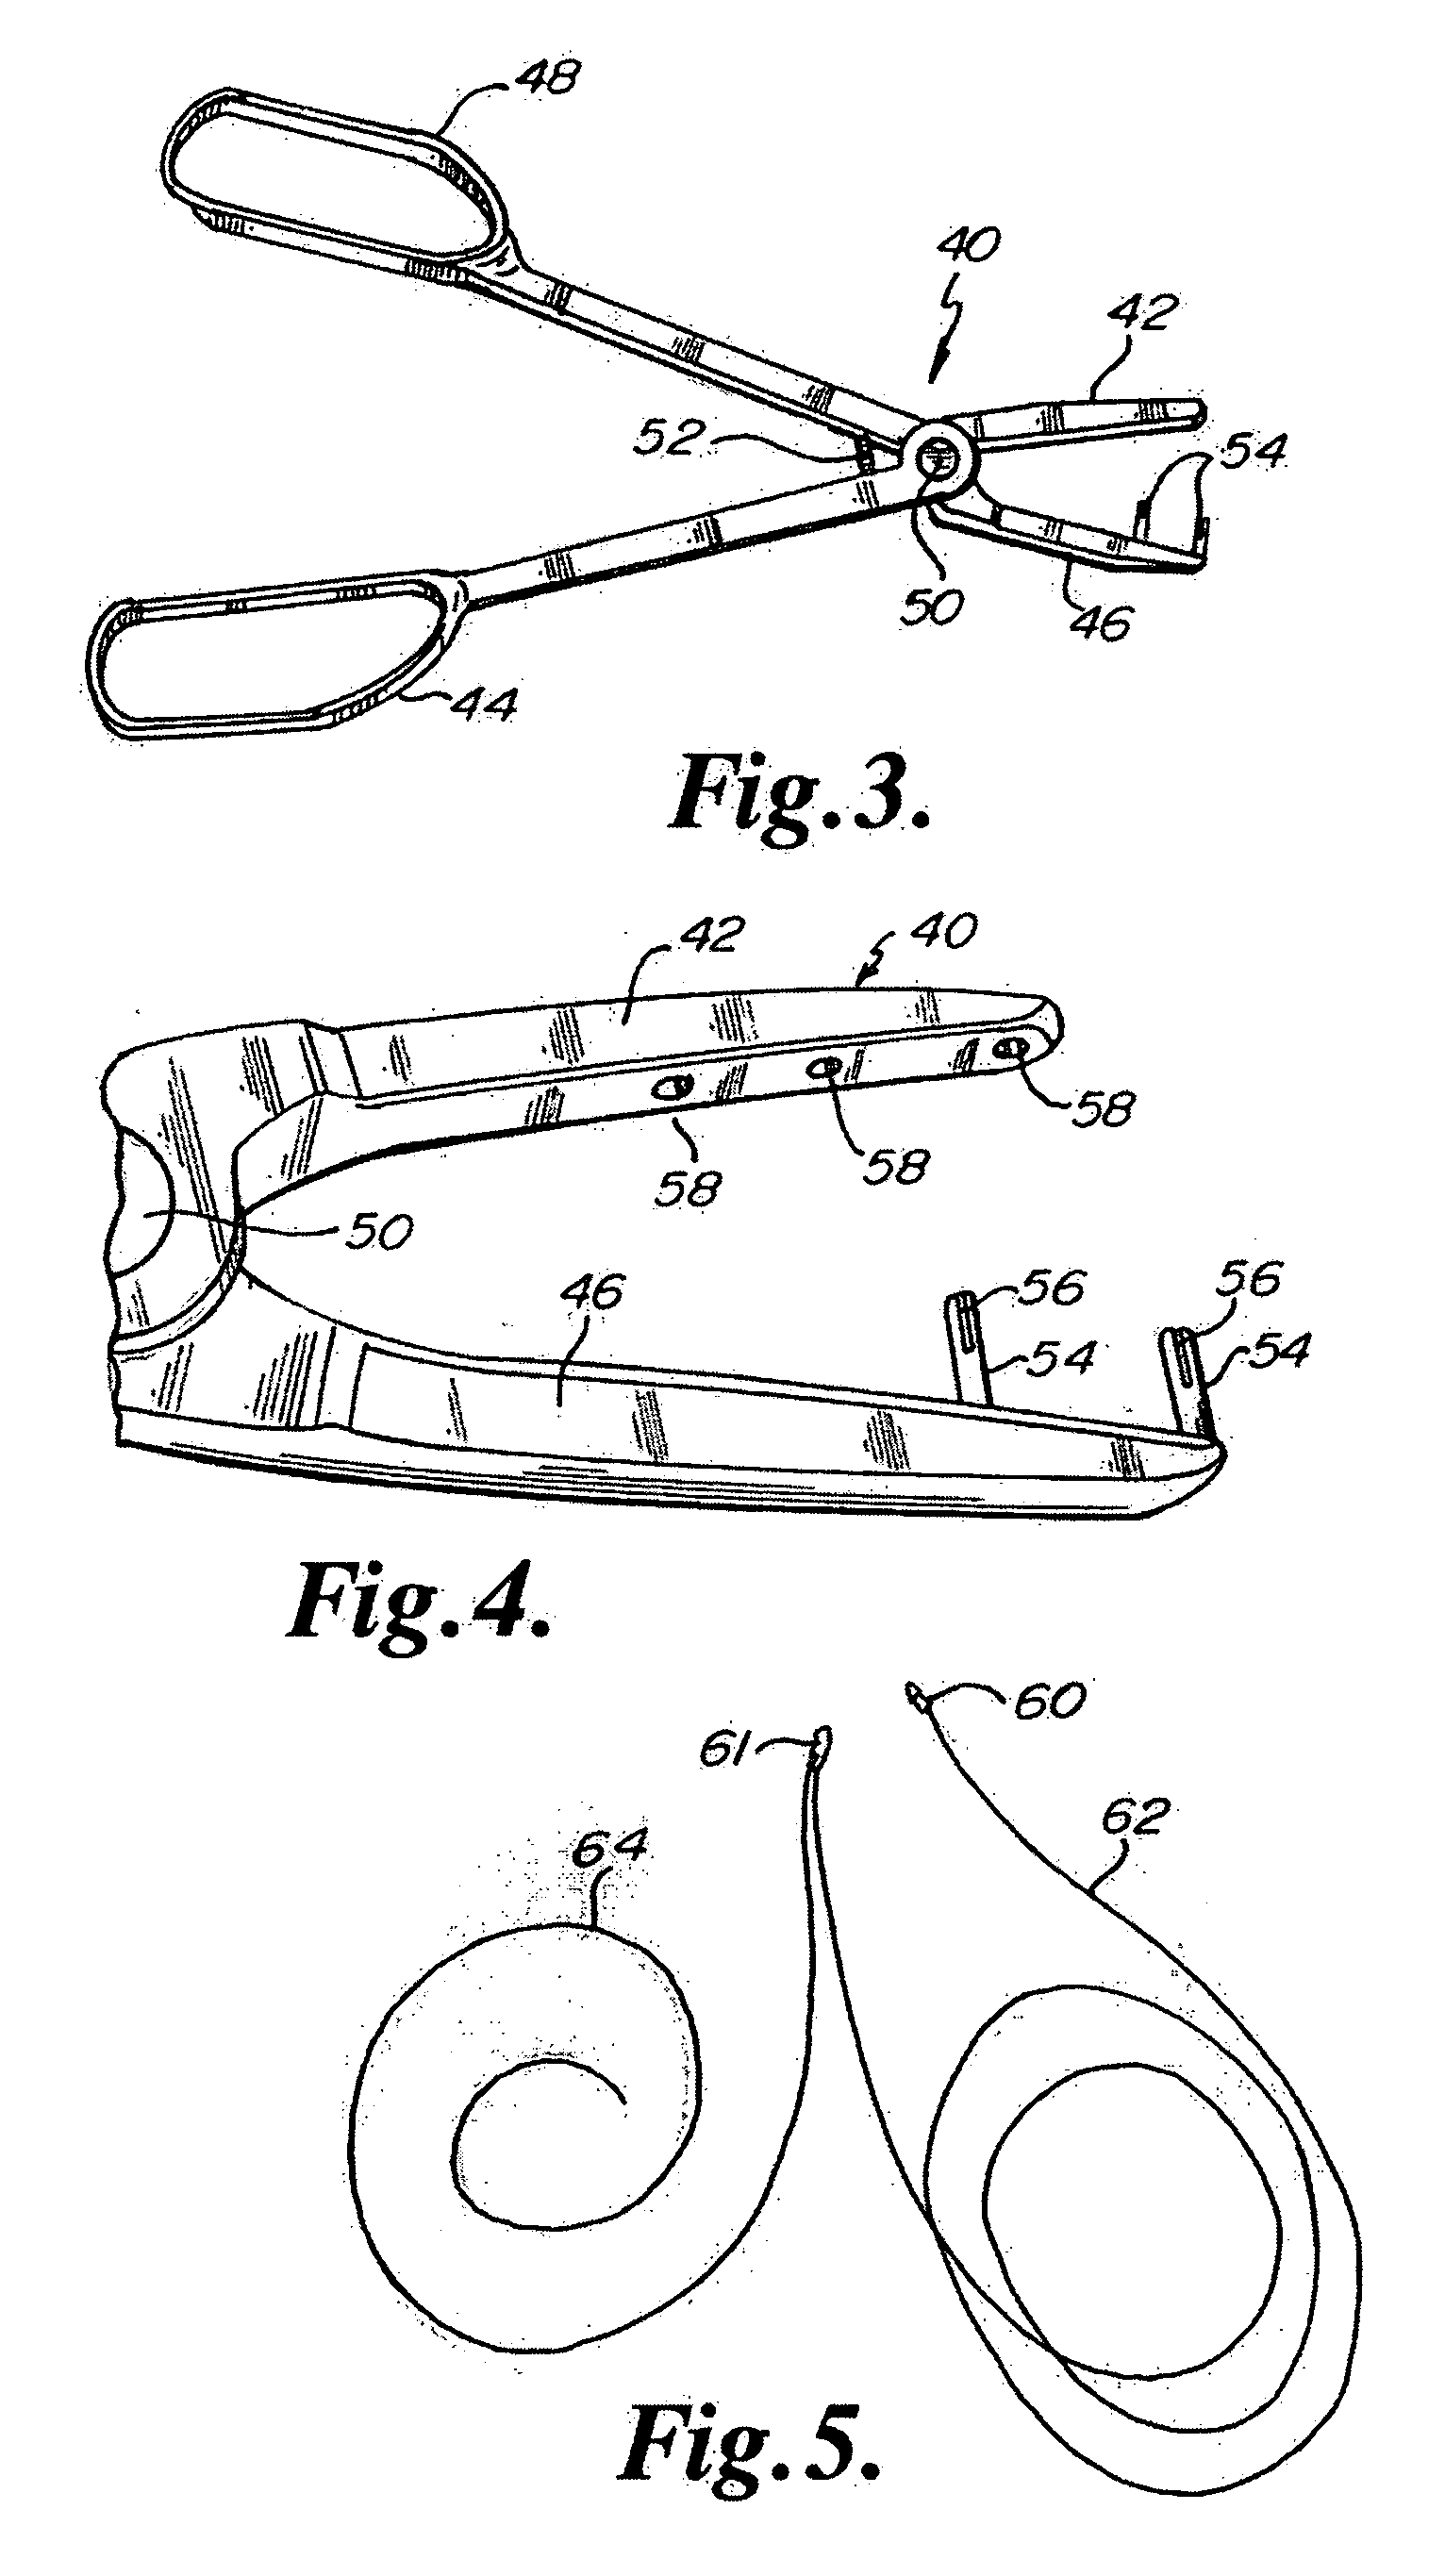 Devices and Methods for Ligating Uterine Arteries